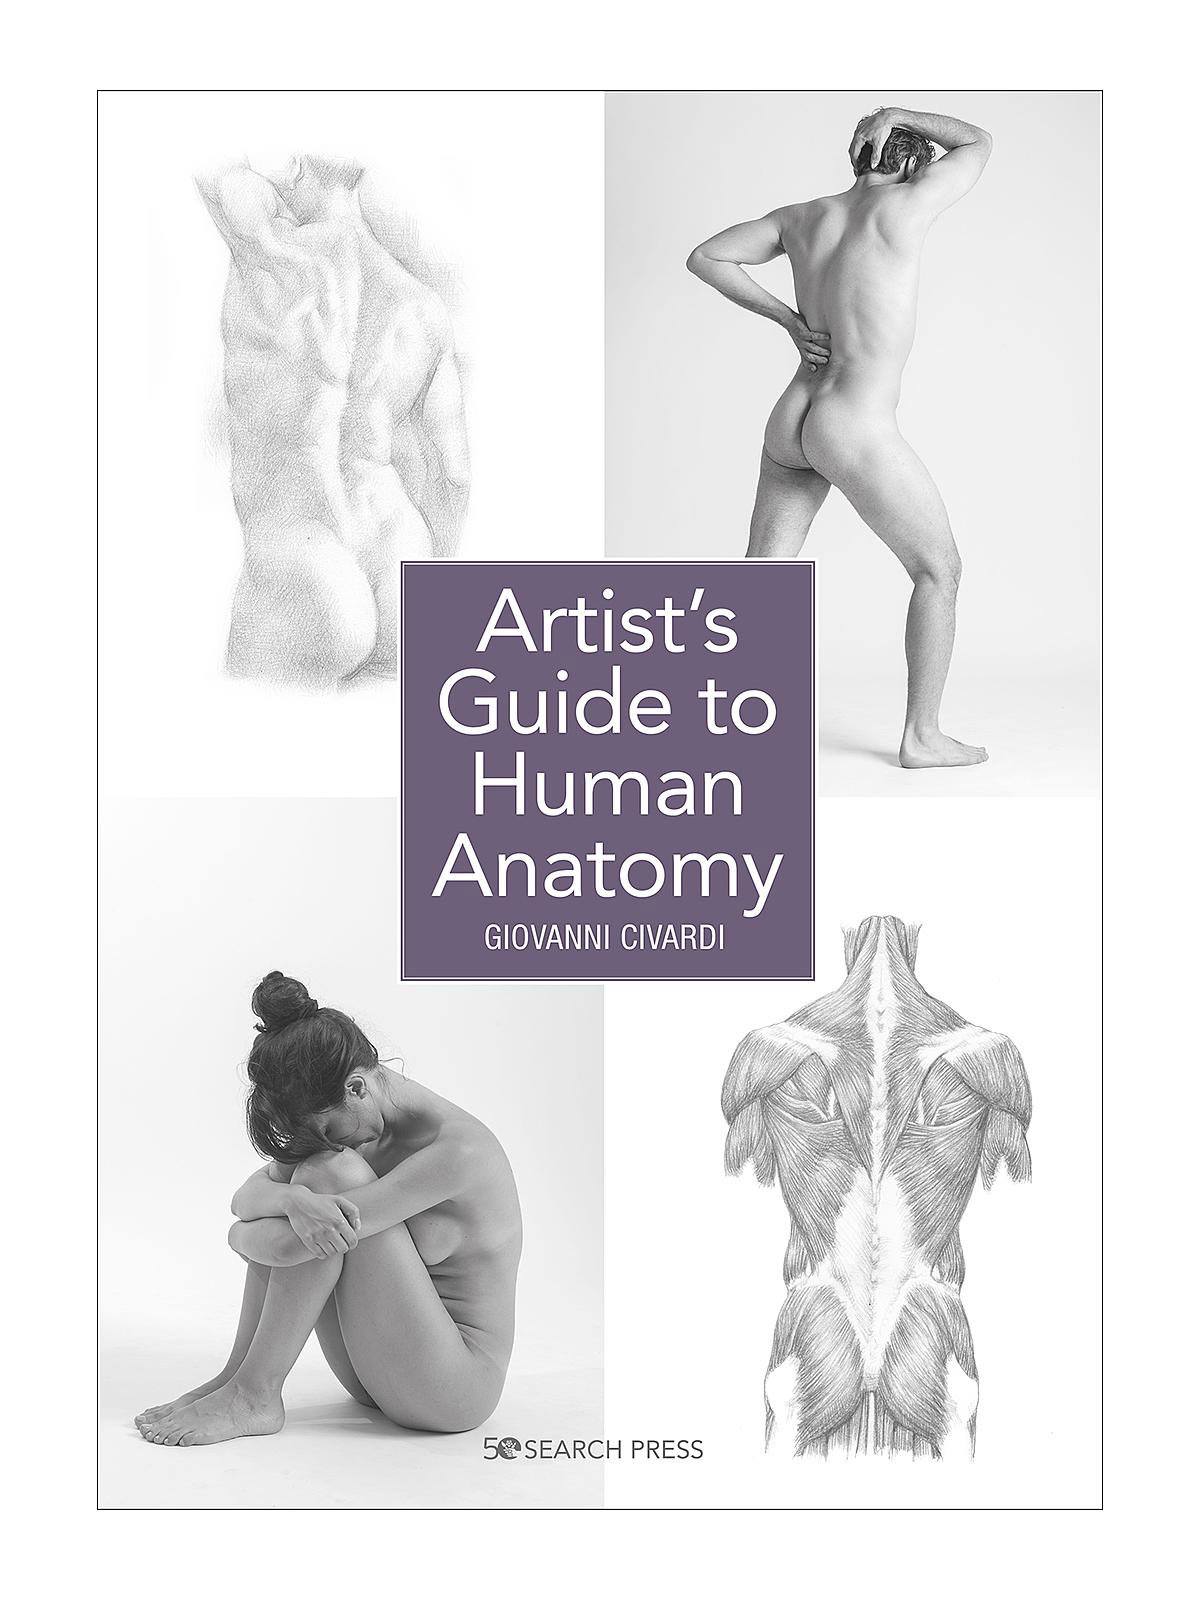 Book Scans | Human anatomy drawing, Anatomy for artists, Anatomy